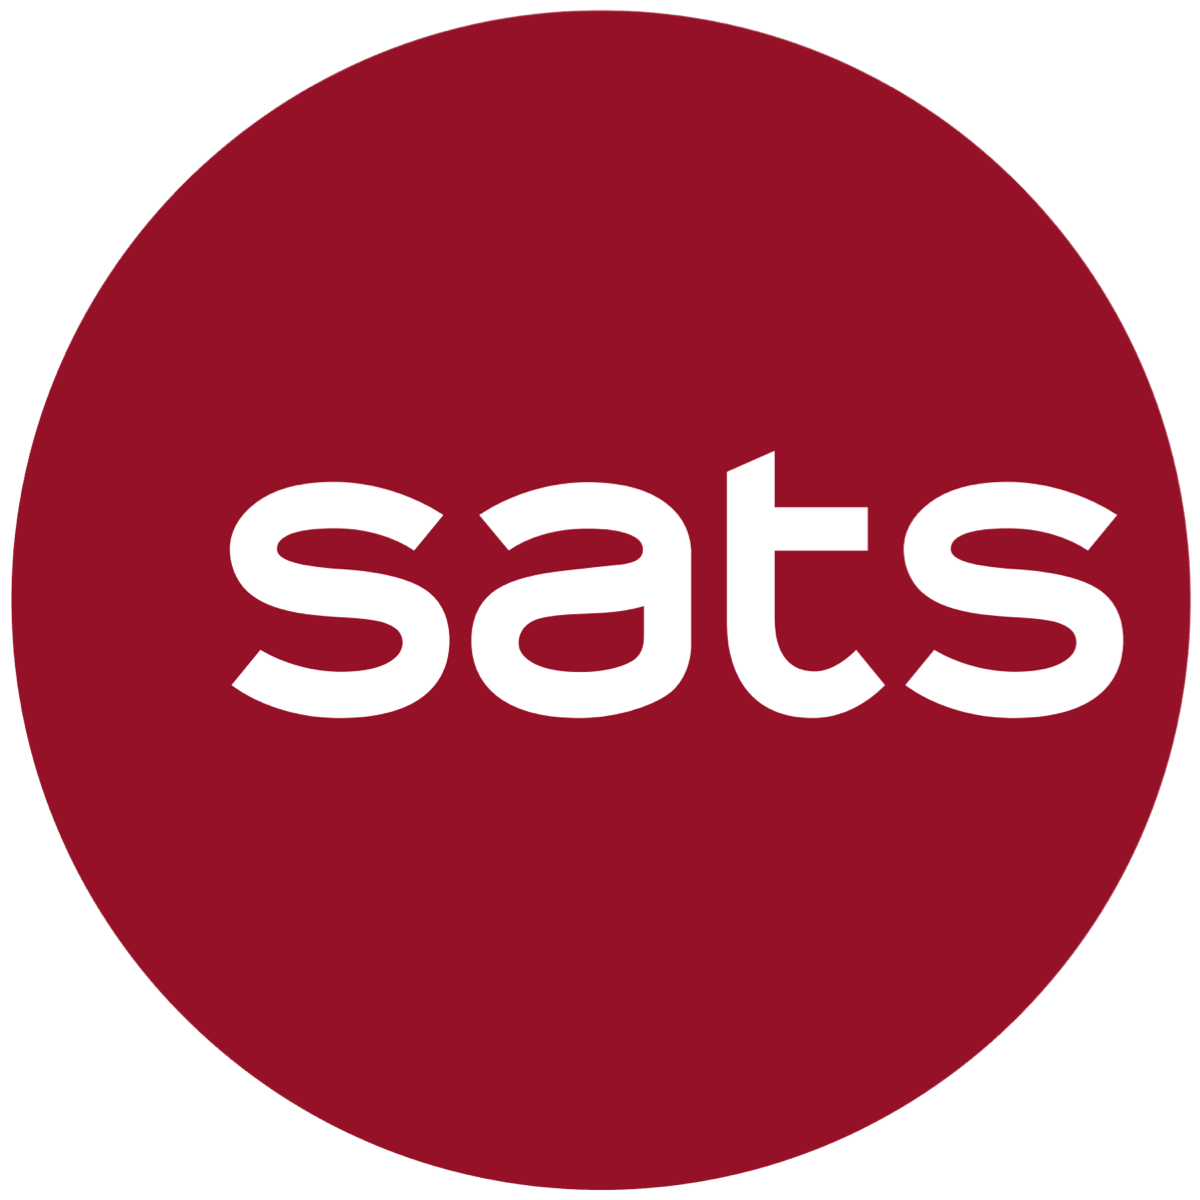 SATS Ltd - OCBC Investment 2017-10-02: Upgrade To BUY On Valuation Grounds